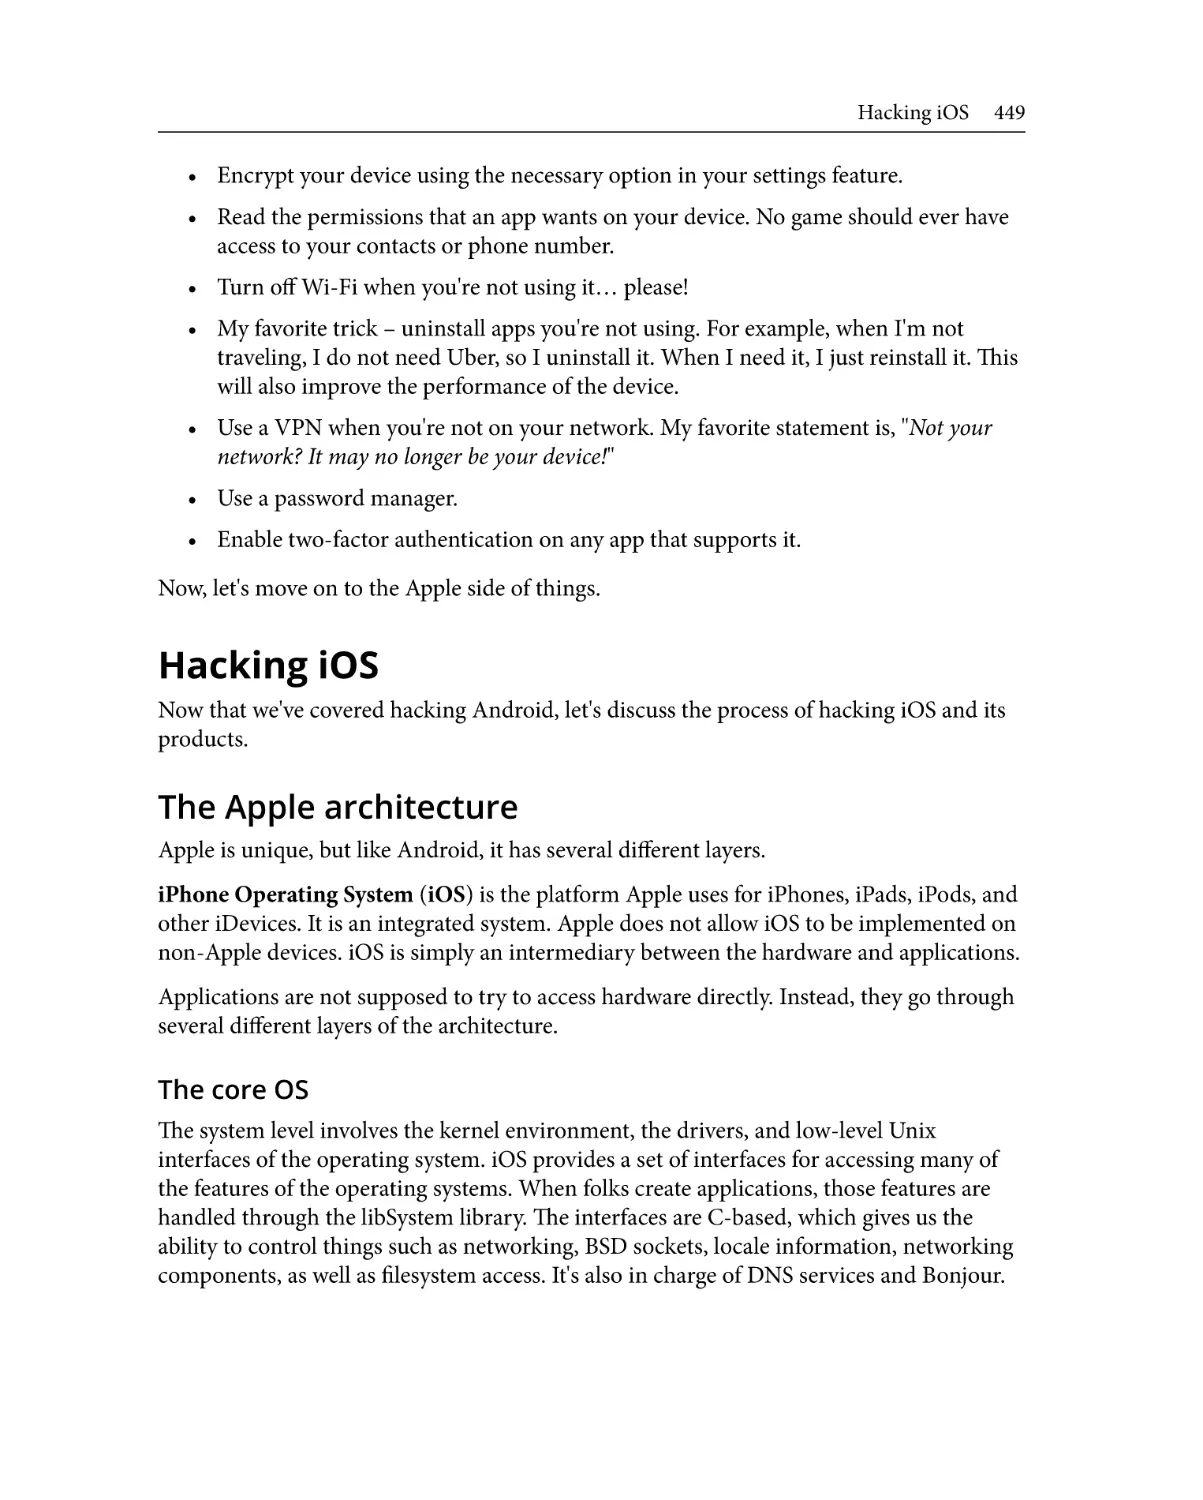 Hacking iOS
The Apple architecture